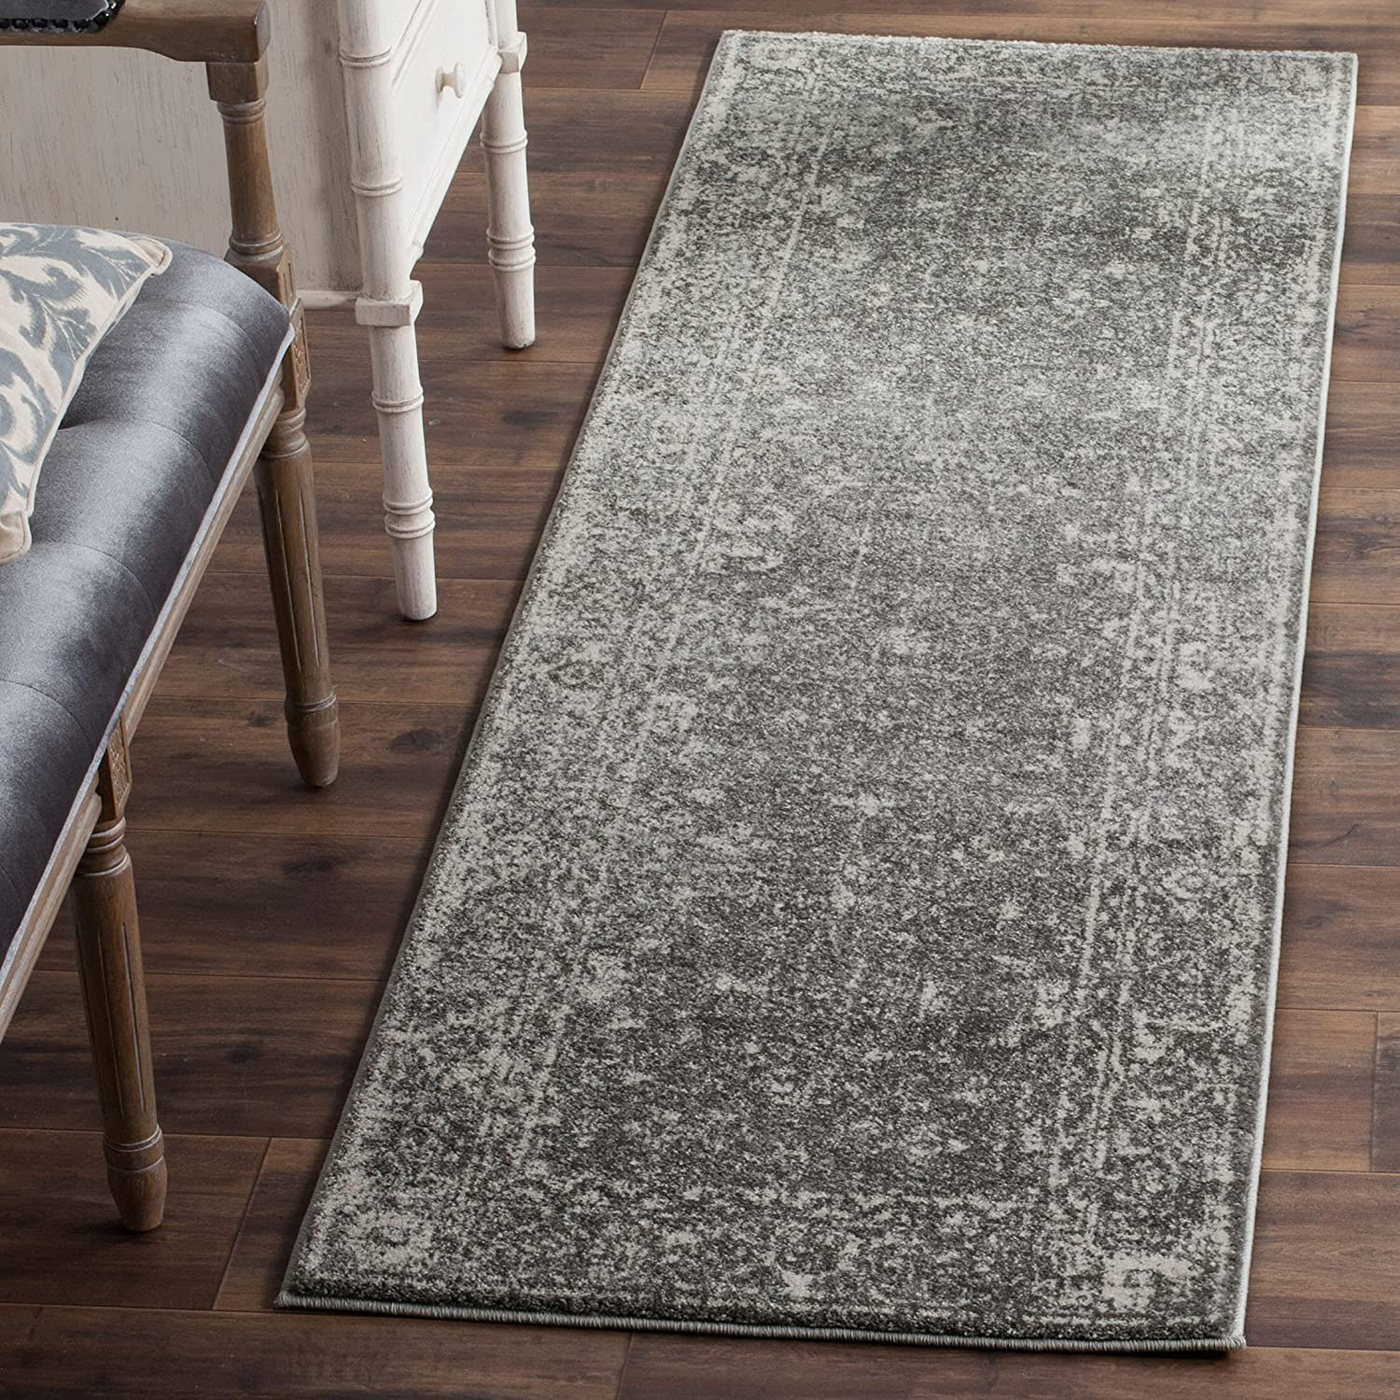 Safavieh Evoke Collection EVK270S Shabby Chic Distressed Non-Shedding Stain Resistant Living Room Bedroom Runner, 2'2" x 17' , Grey / Ivory